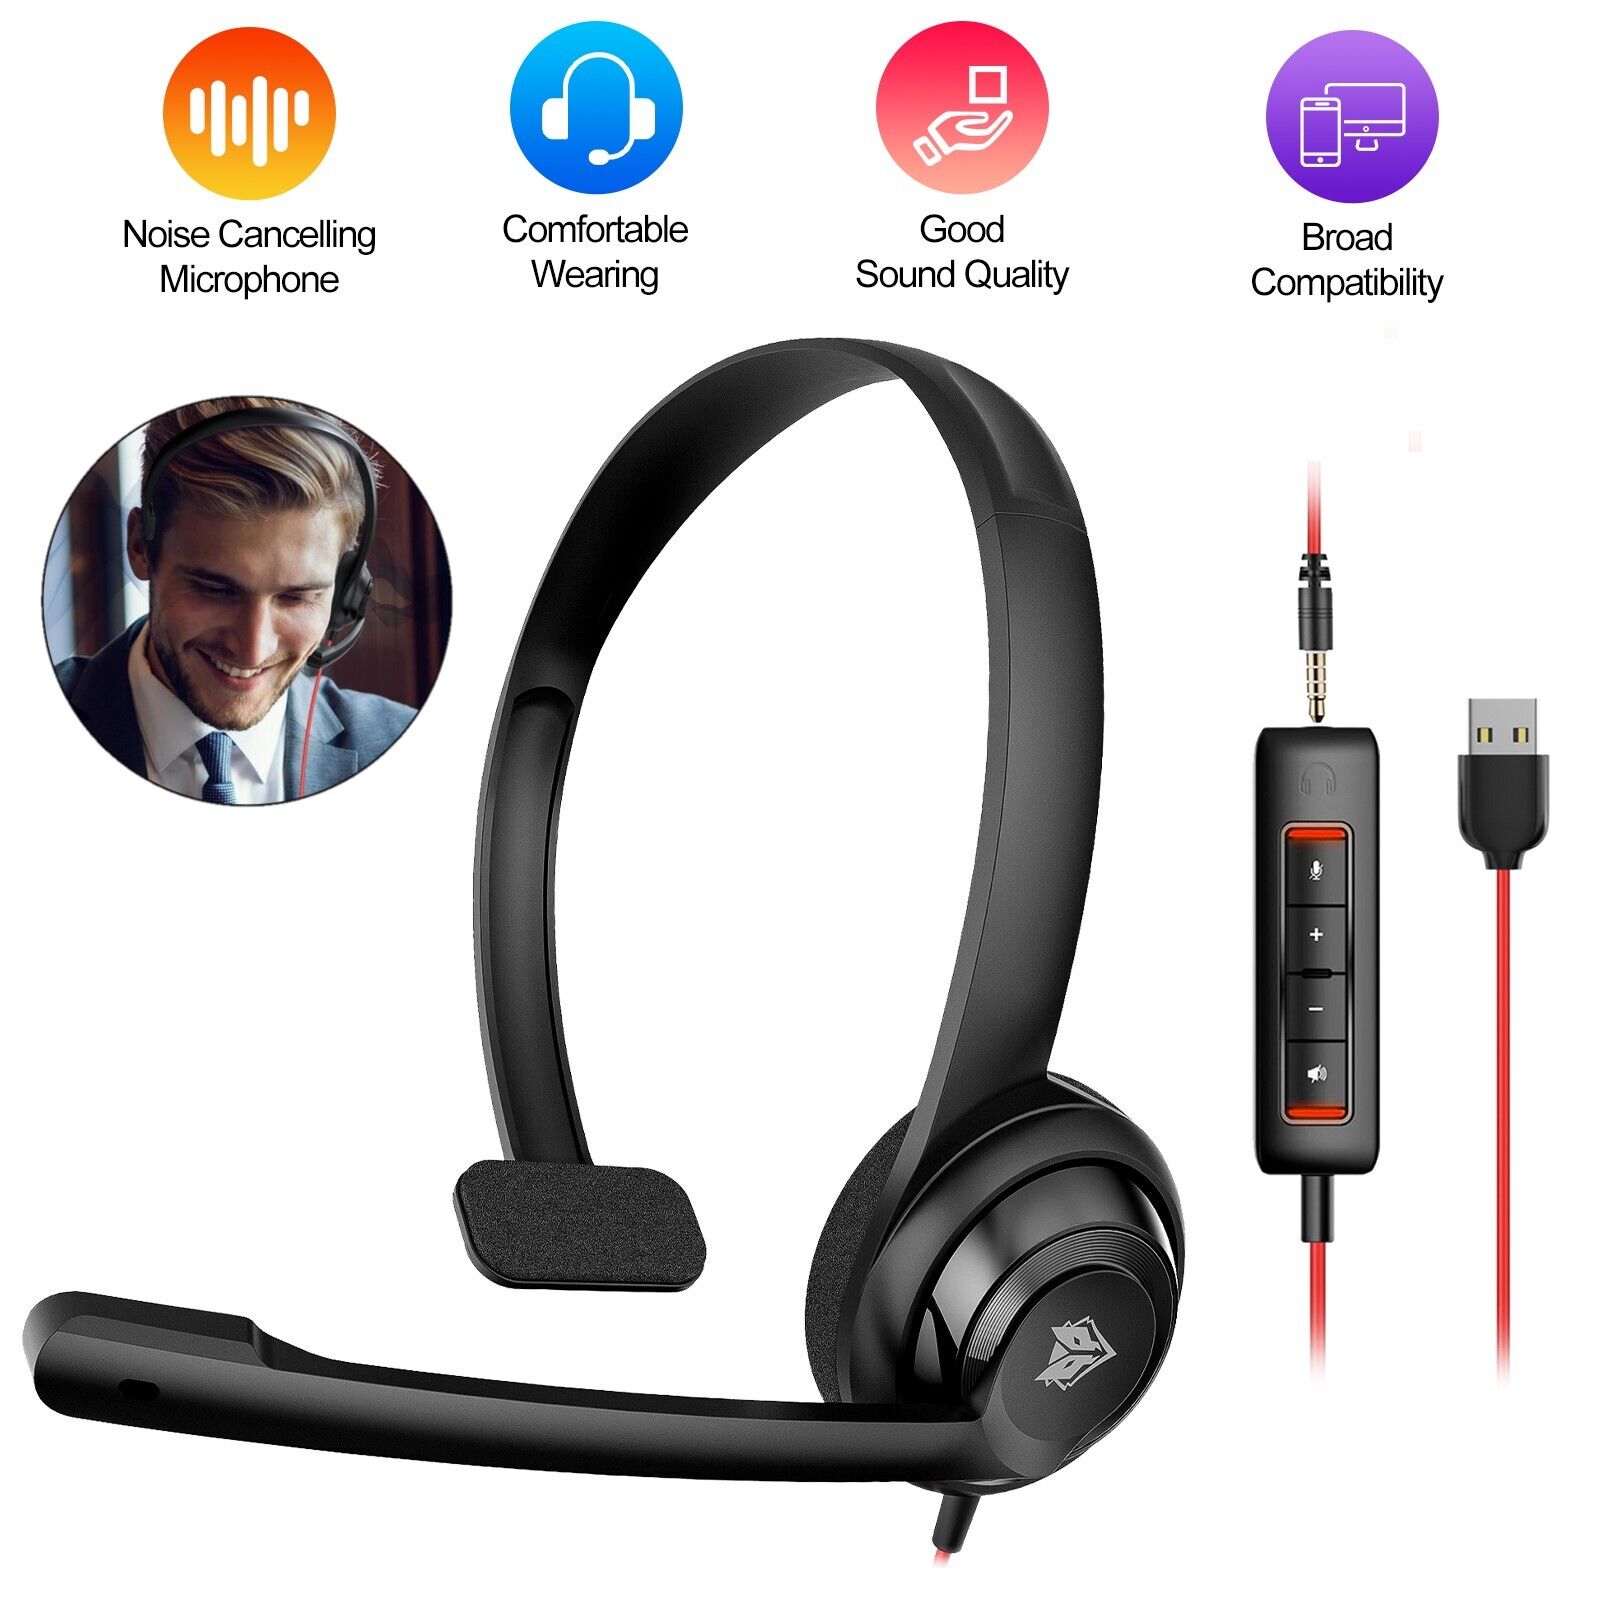 USB Wired Computer Headset with Noise-Cancelling Microphone for Skype Meetings